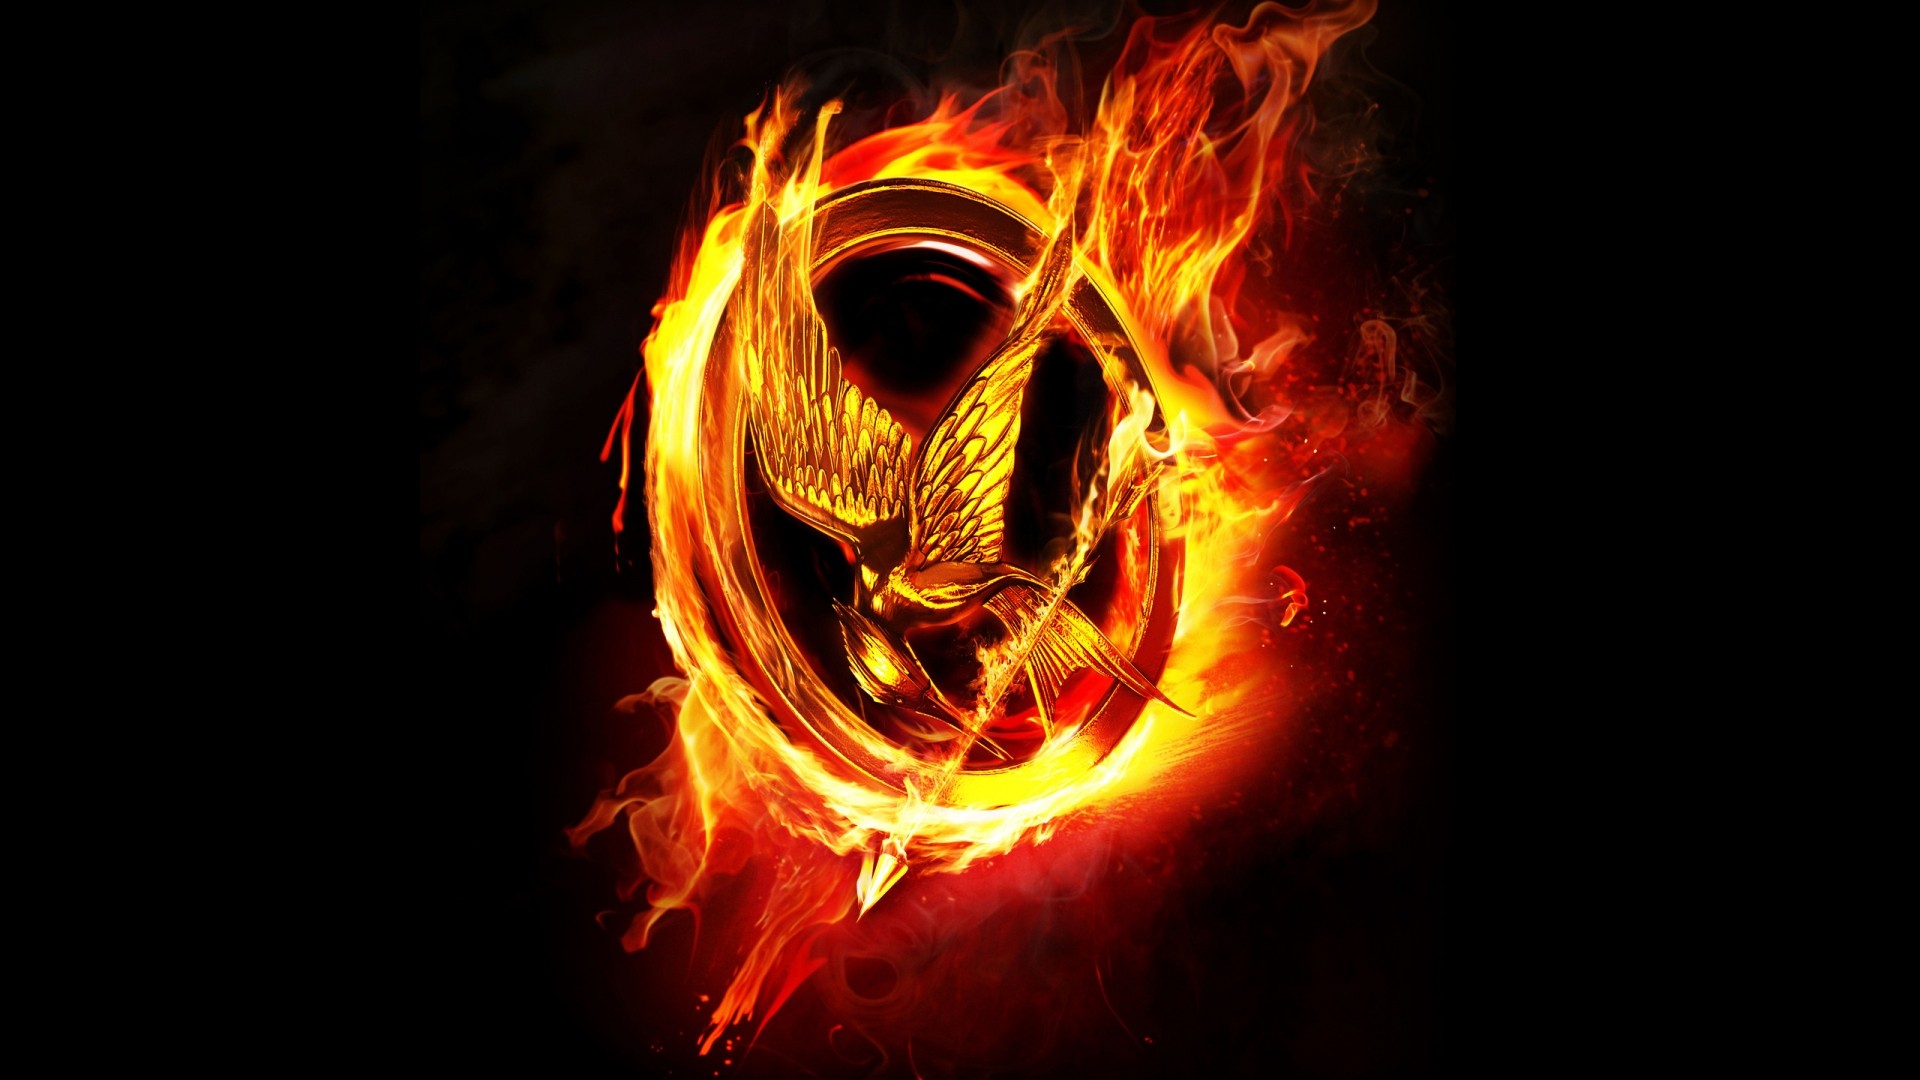 Catching Fire (4)